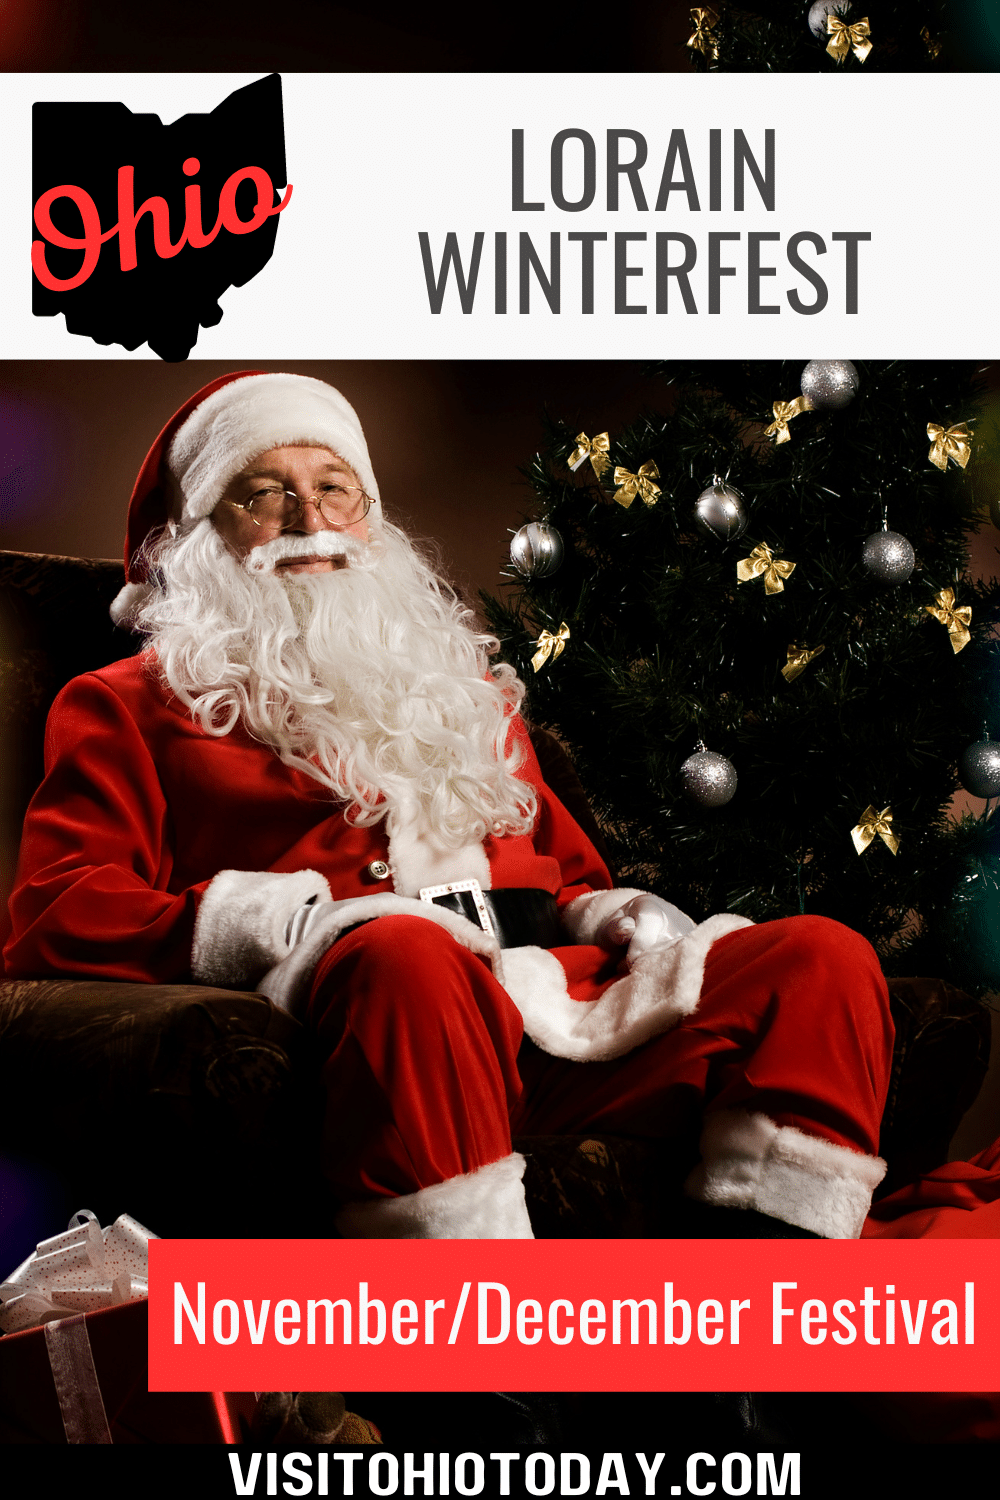 The Lorain Winterfest is an annual festival on the Saturday after Thanksgiving. It is a one-day festival, but some activities continue until the end of December.